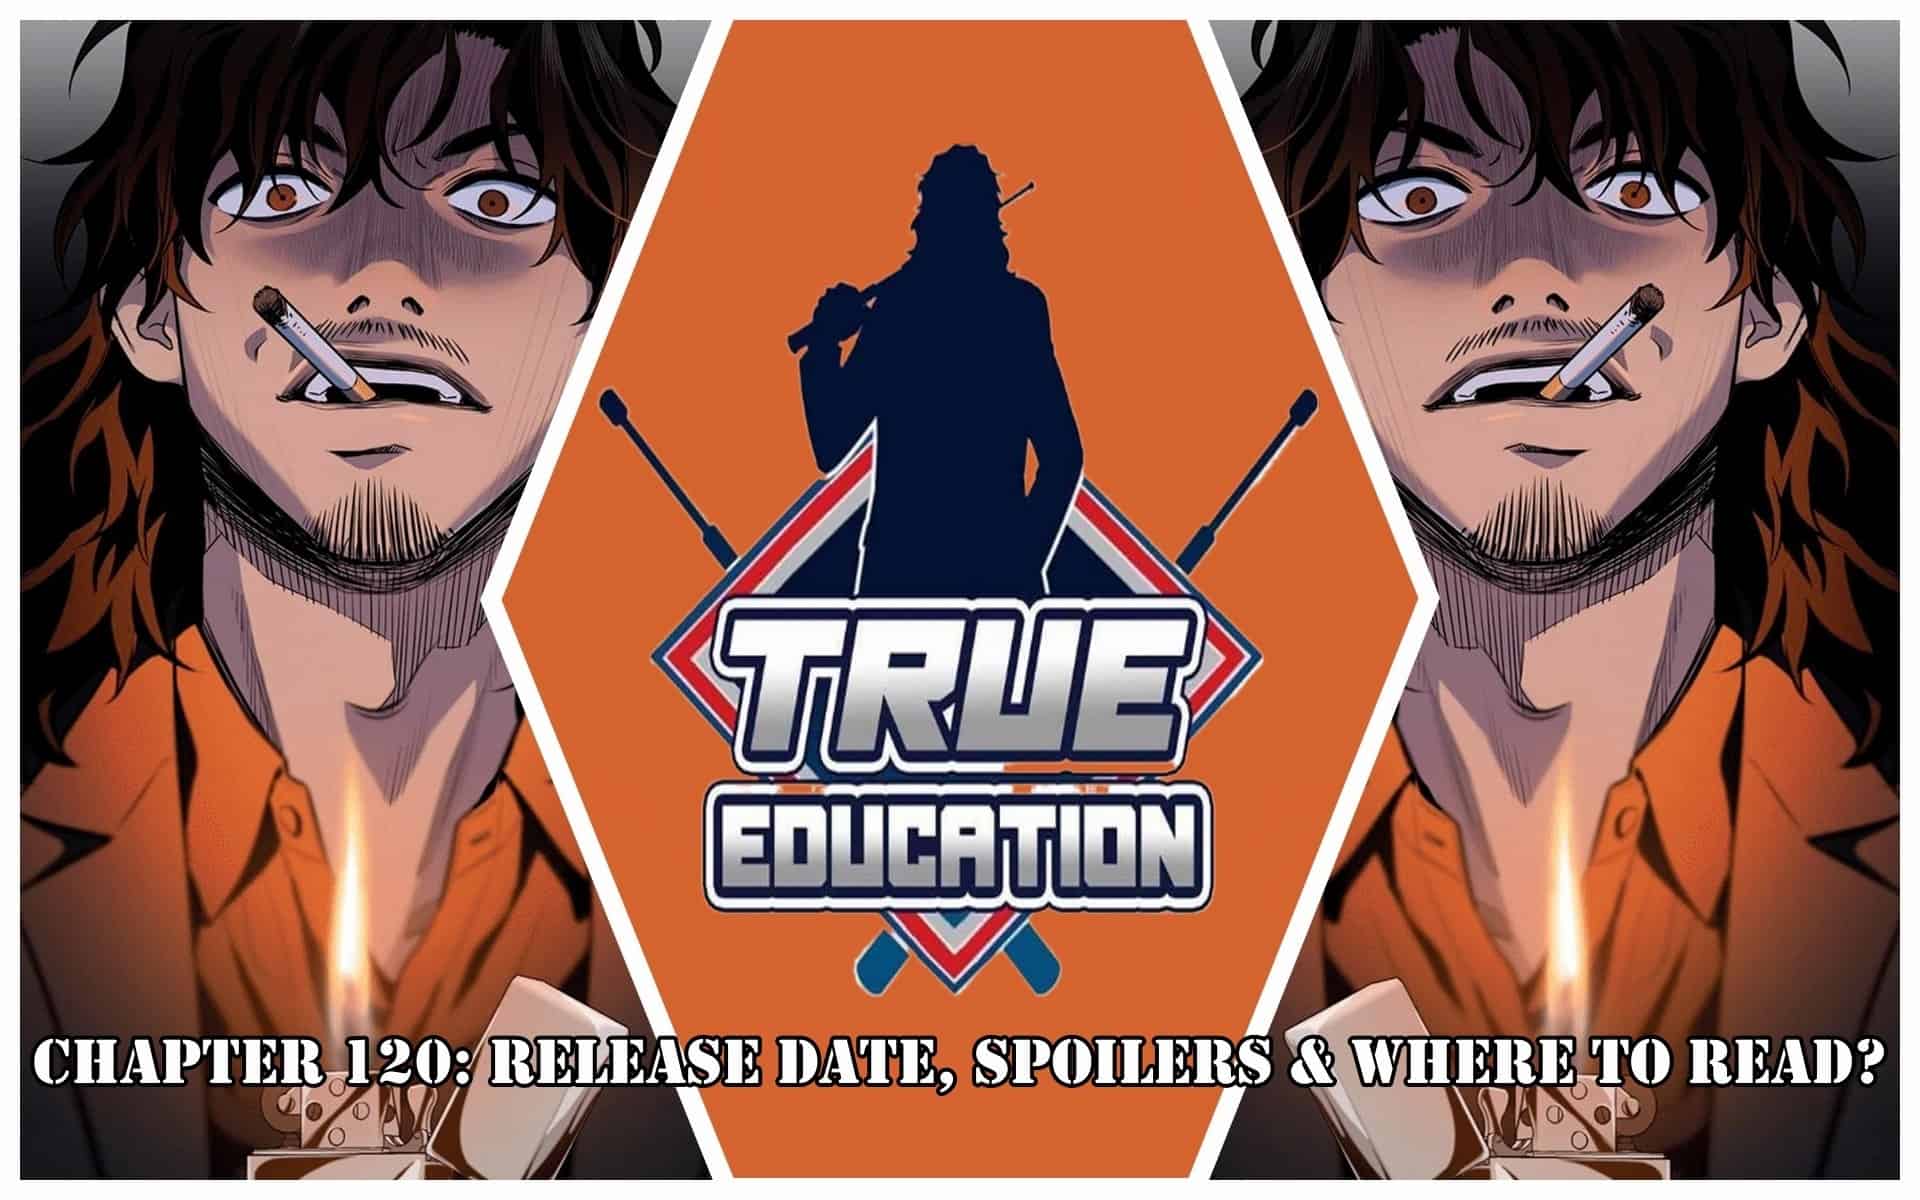 True Education Chapter 120: Release Date, Spoilers & Where to Read?